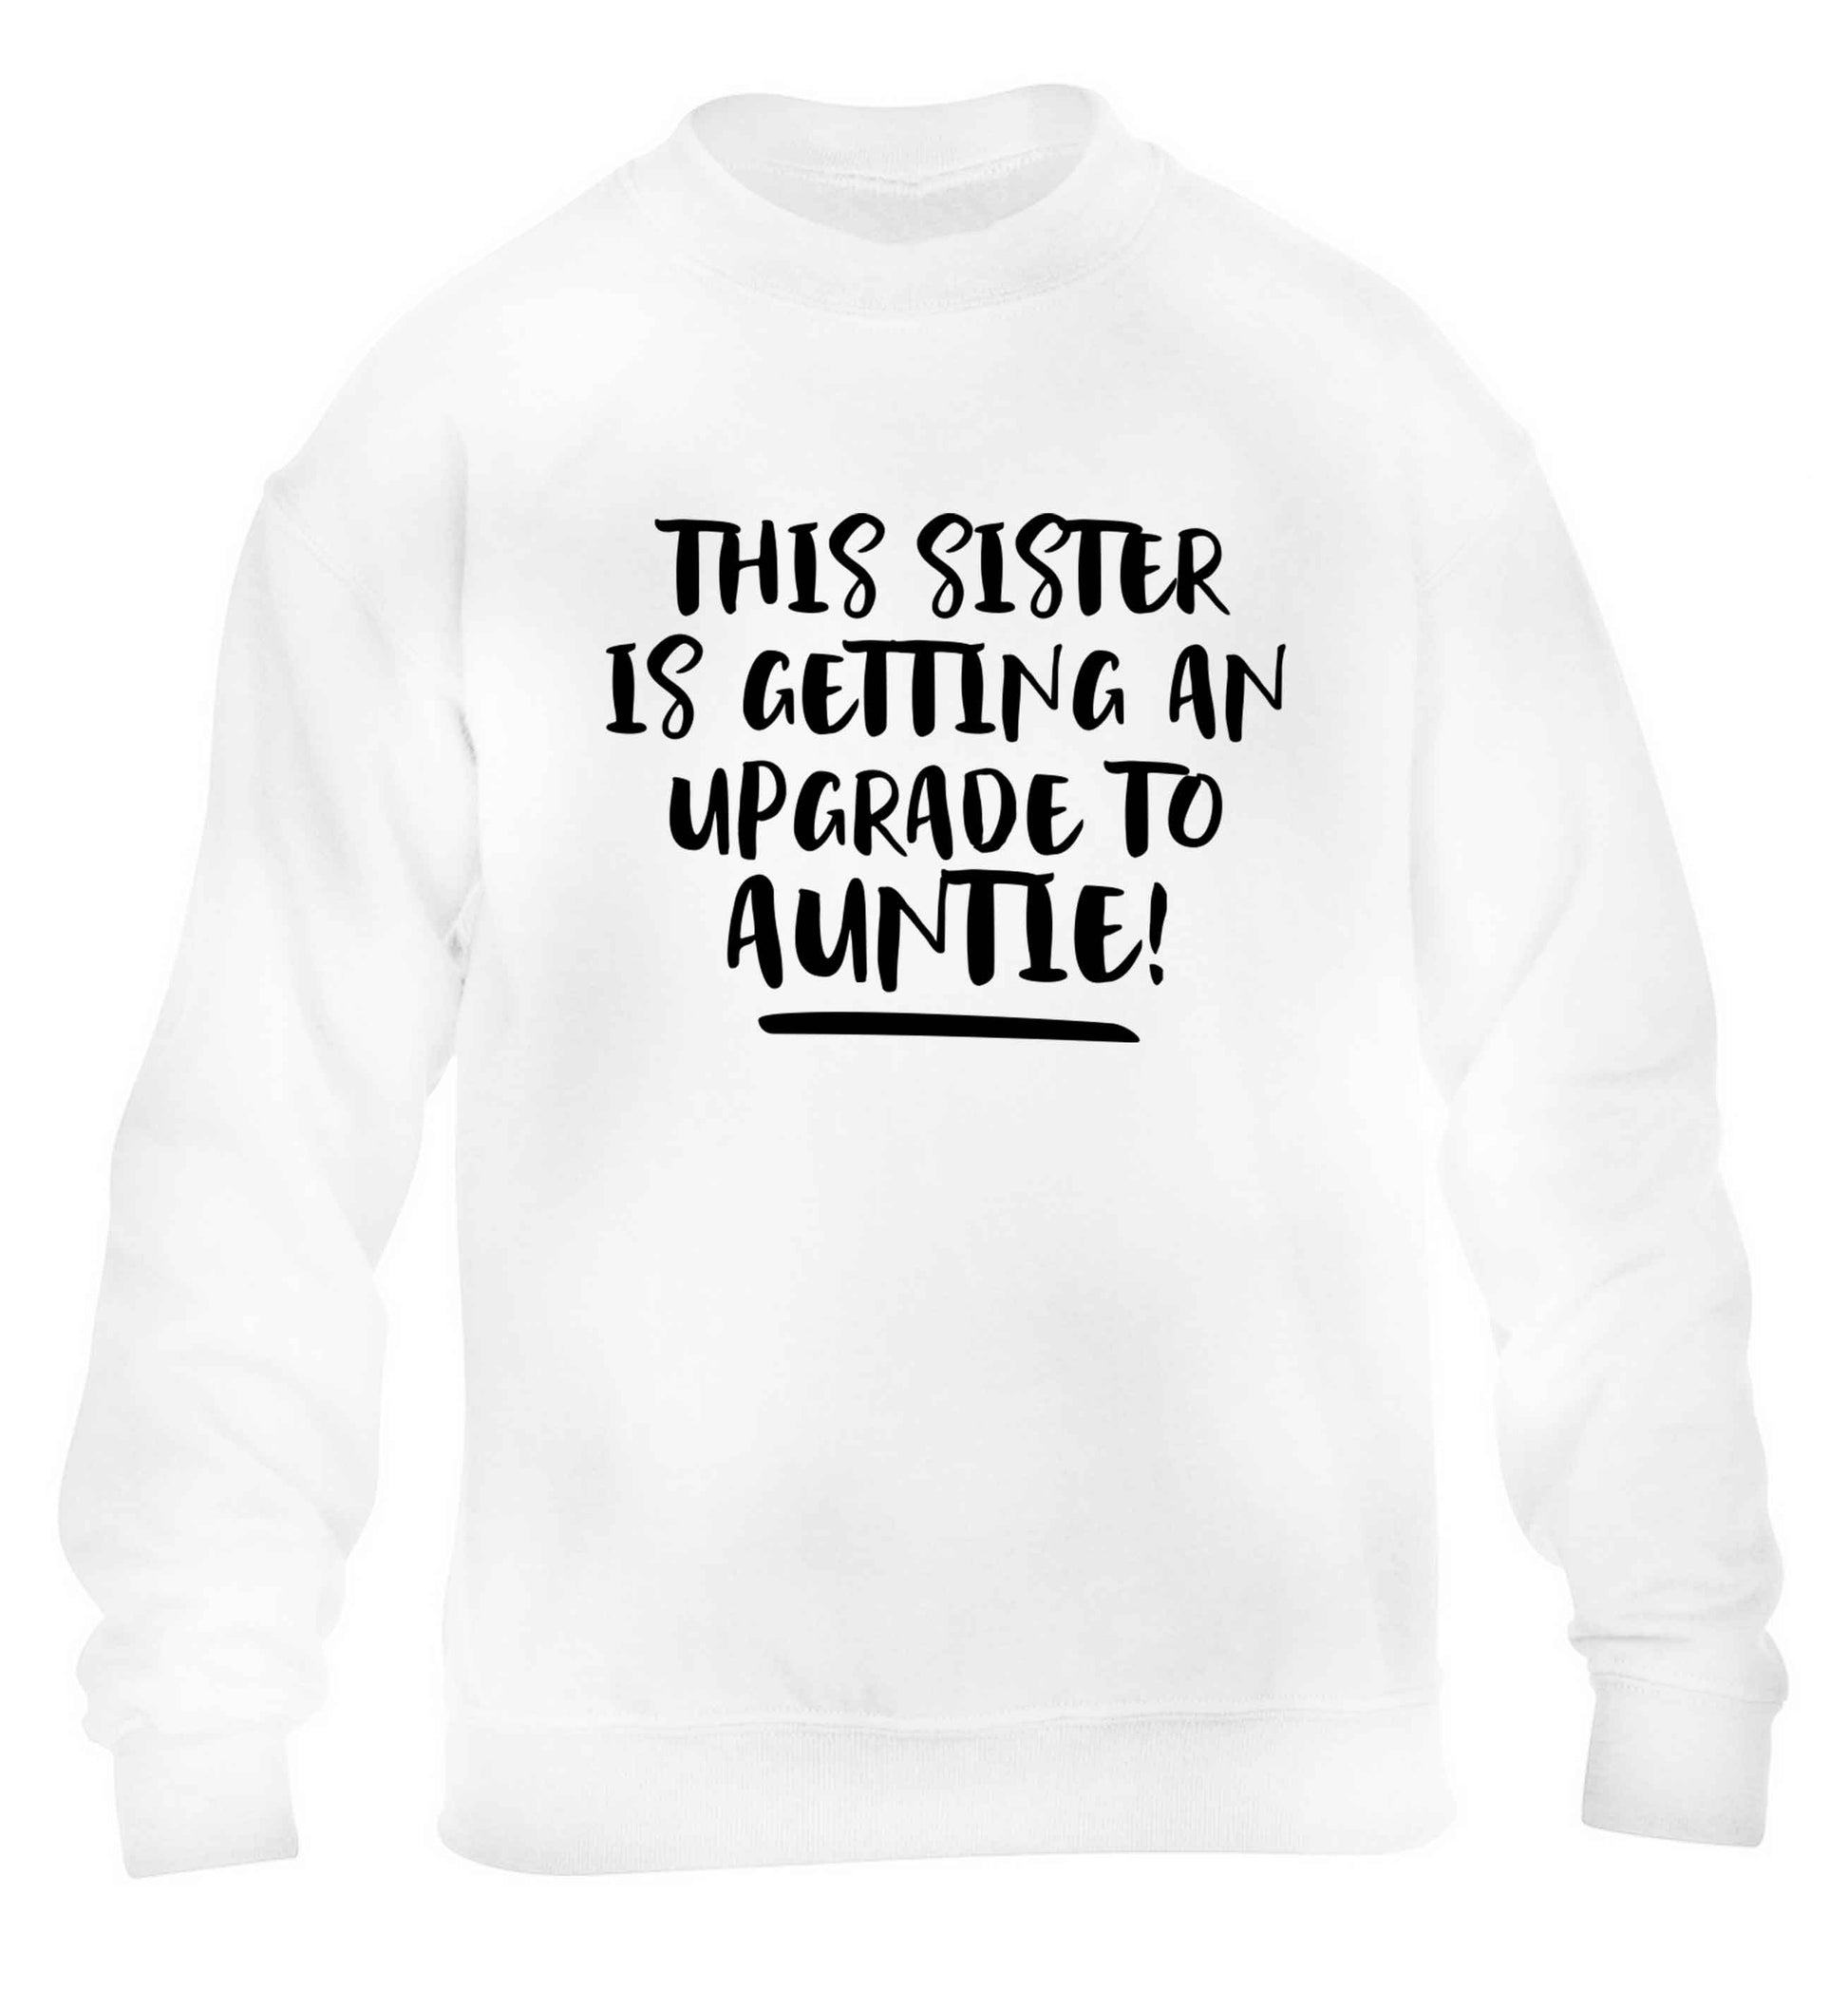 This sister is getting an upgrade to auntie! children's white sweater 12-13 Years